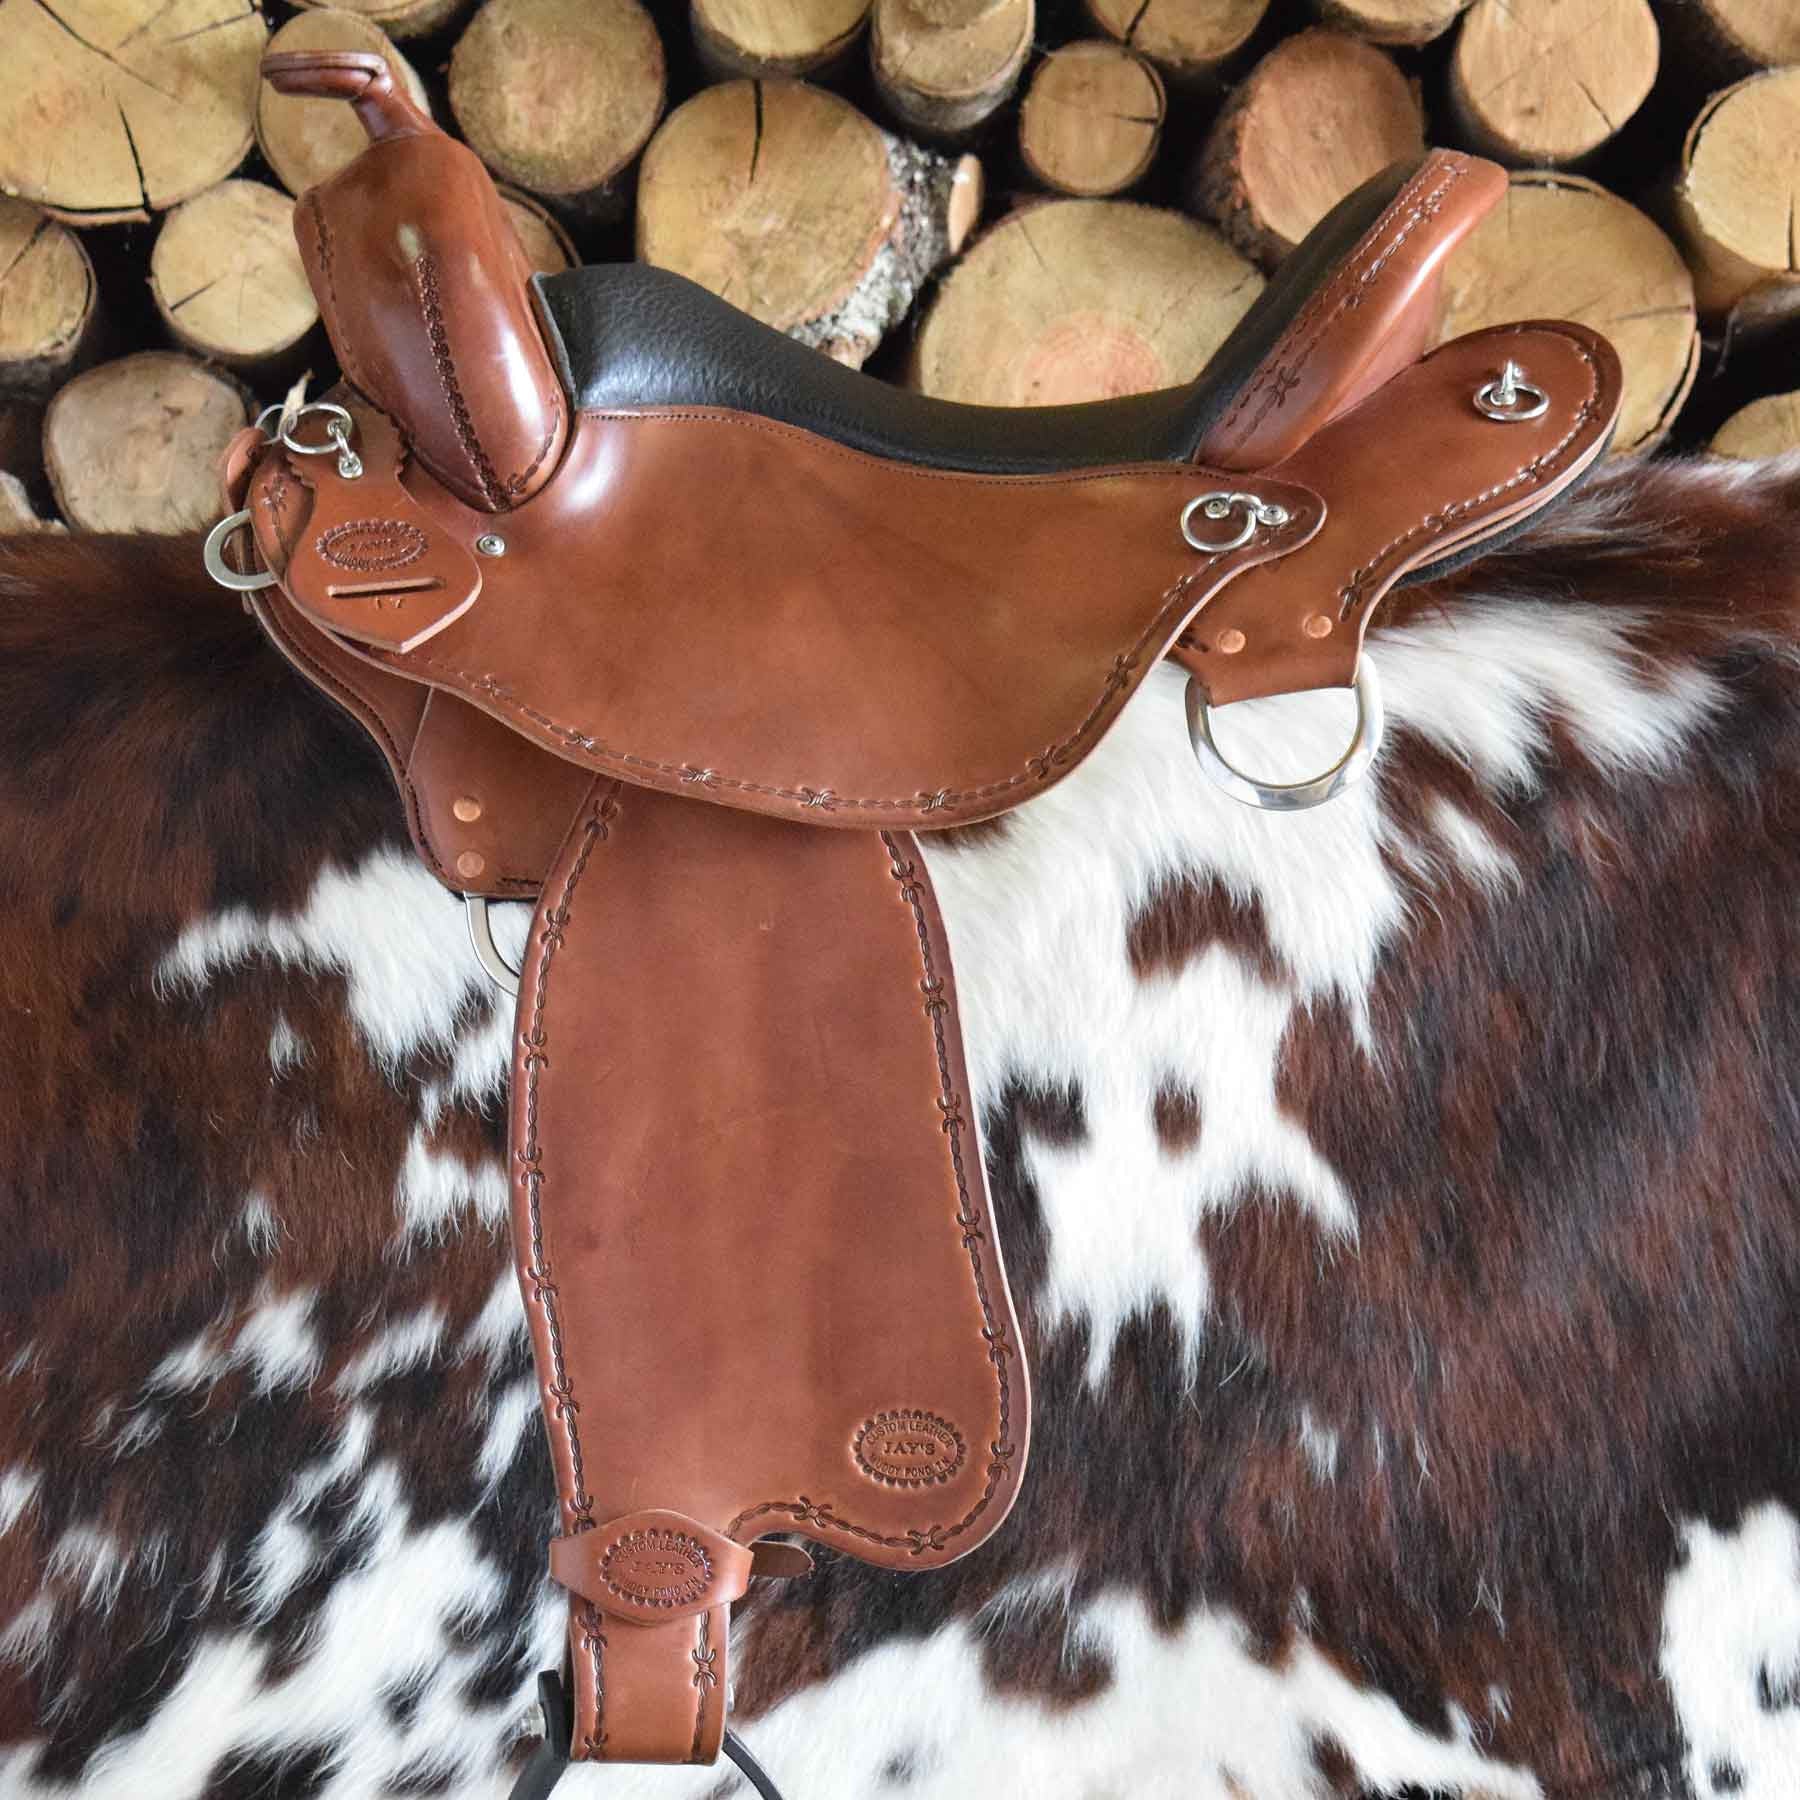 A custom leather Trail Lite /Endurance Saddle by Jay's Saddles in Tennessee 